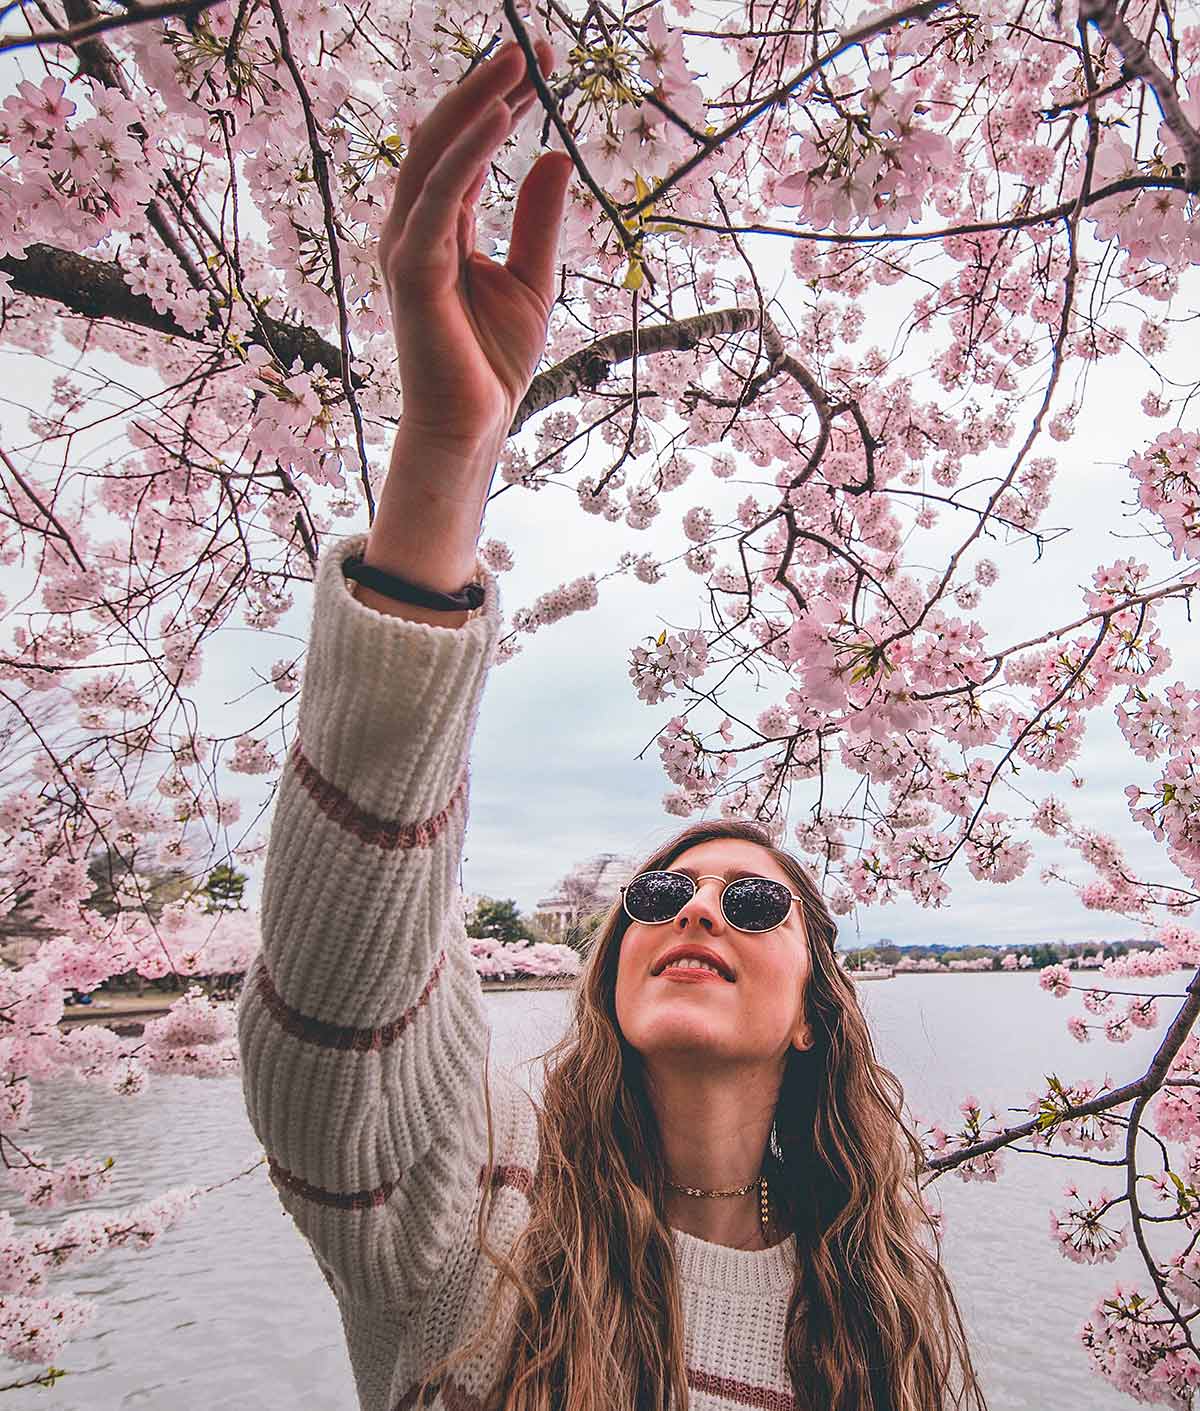 A girl picking cherry blossoms